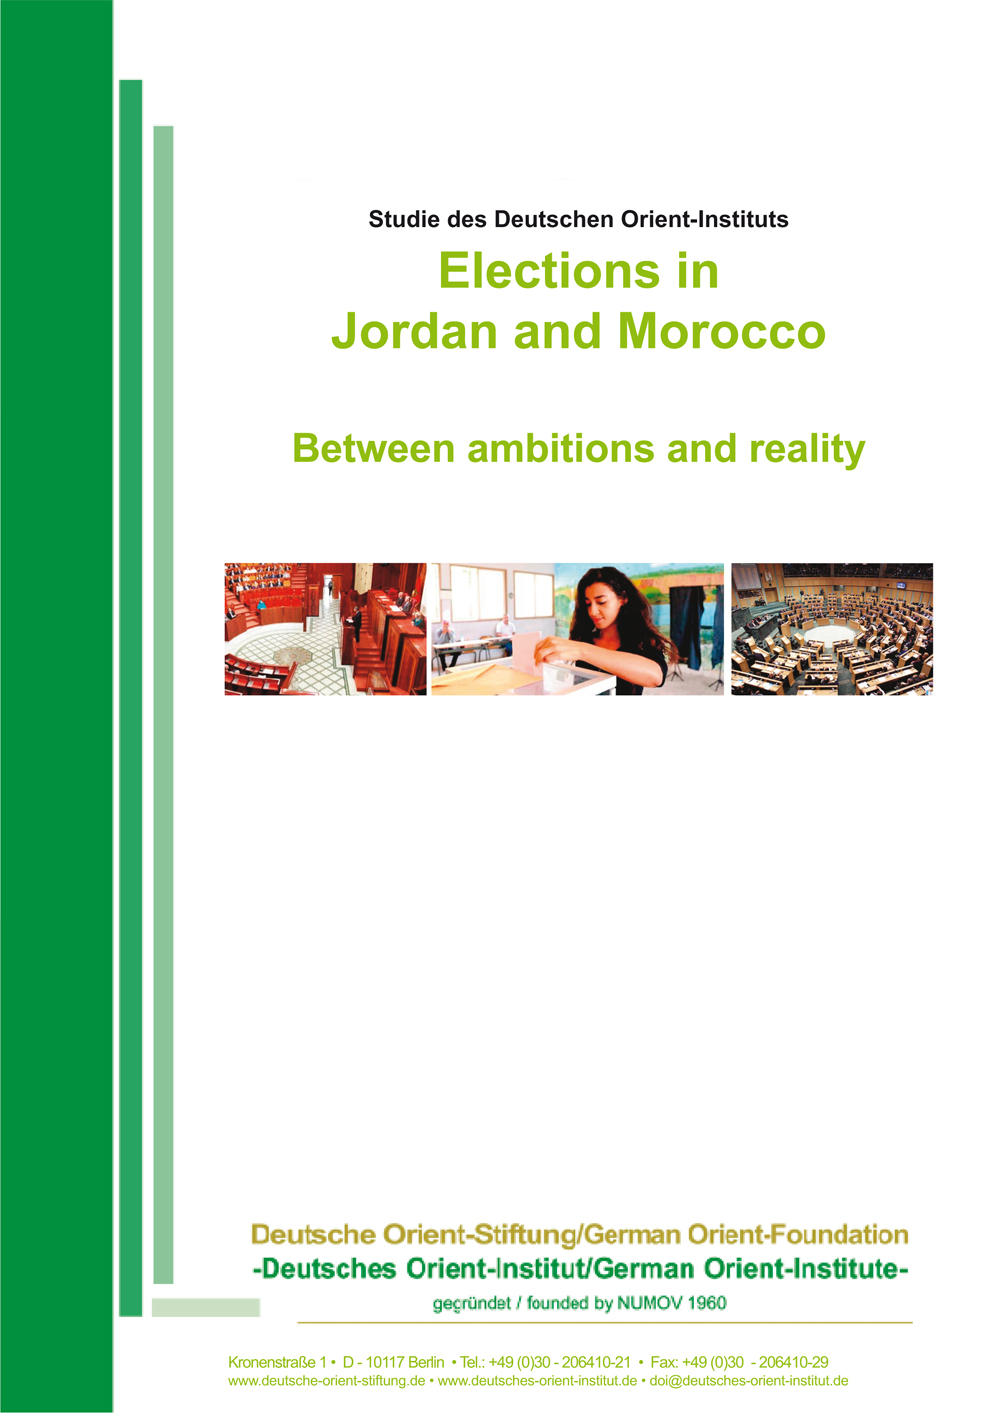 Featured image for “Elections in Jordan and Morocco: Between ambitions and reality”